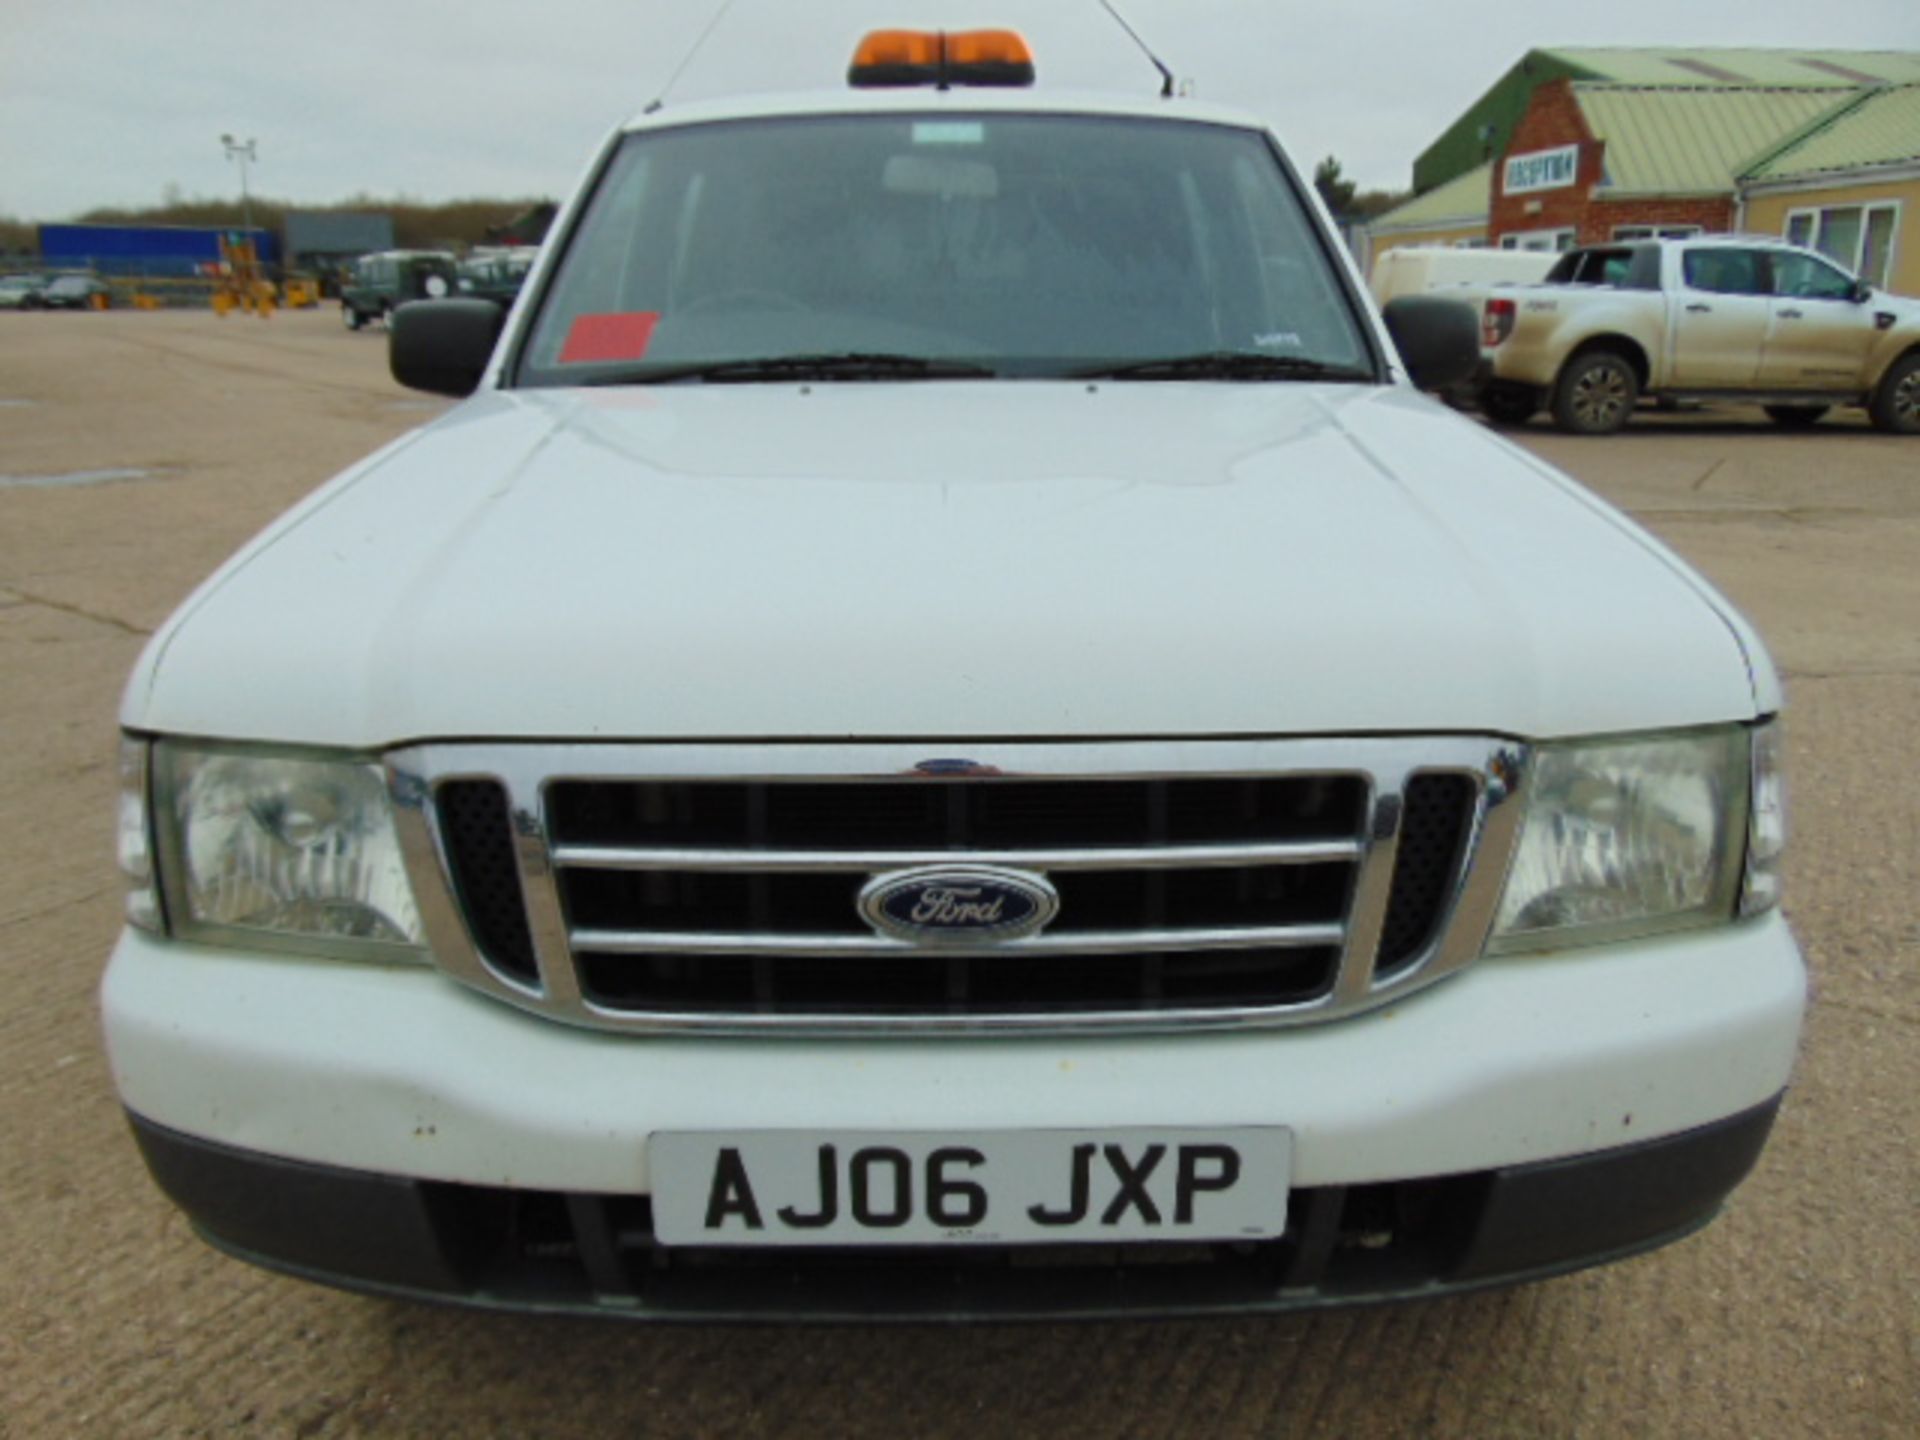 2006 Ford Ranger Double cab pickup - Image 2 of 14